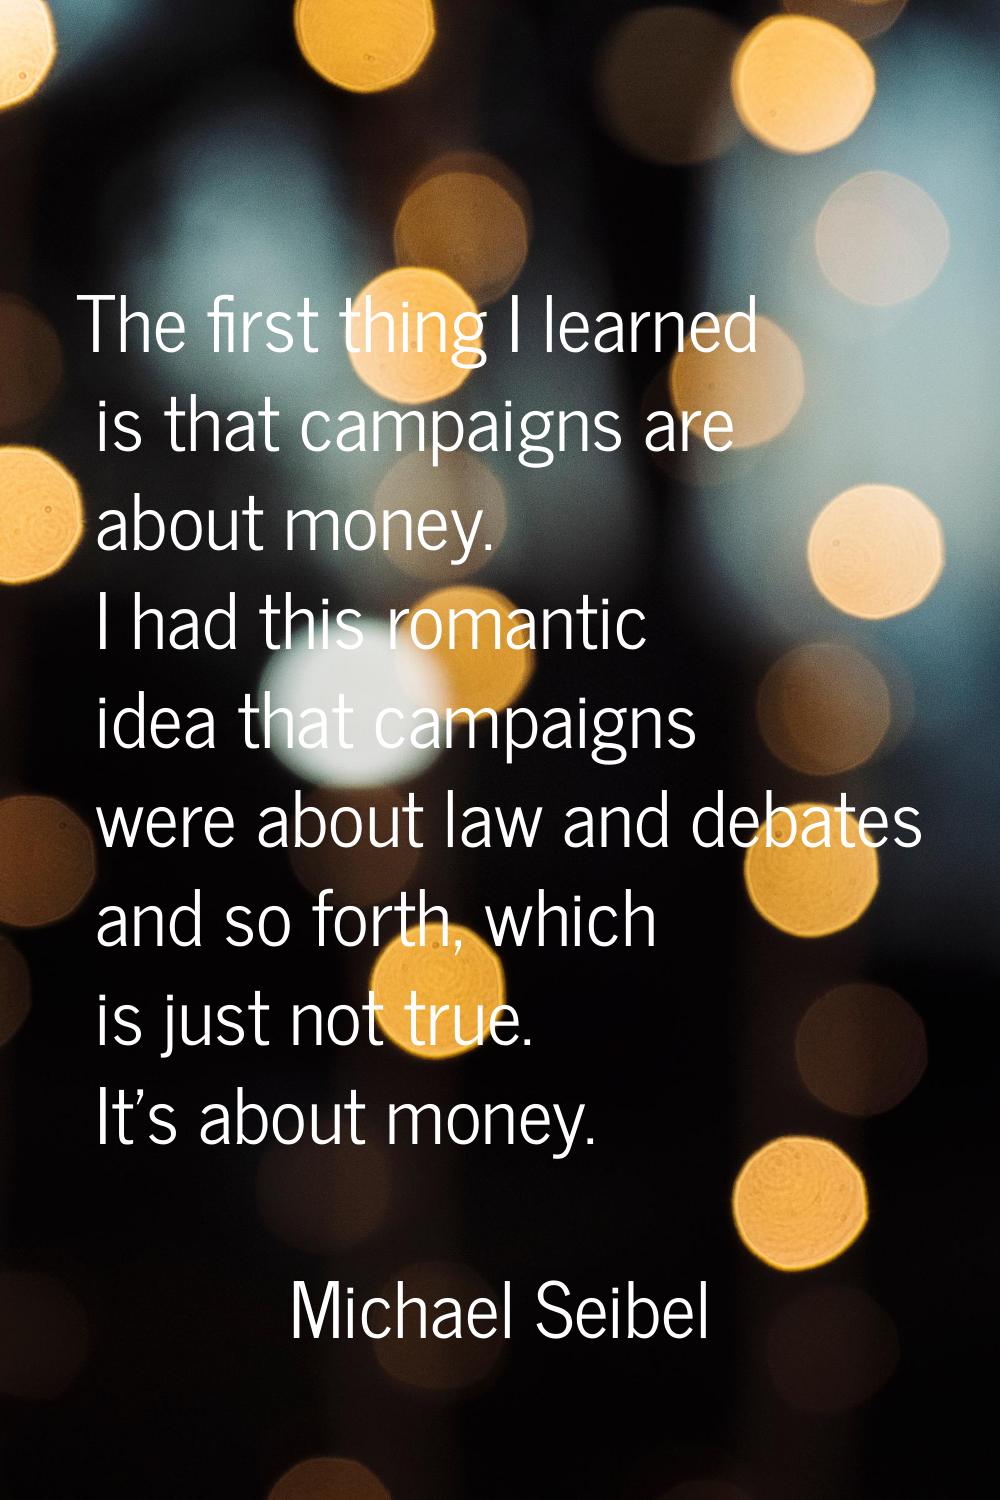 The first thing I learned is that campaigns are about money. I had this romantic idea that campaign